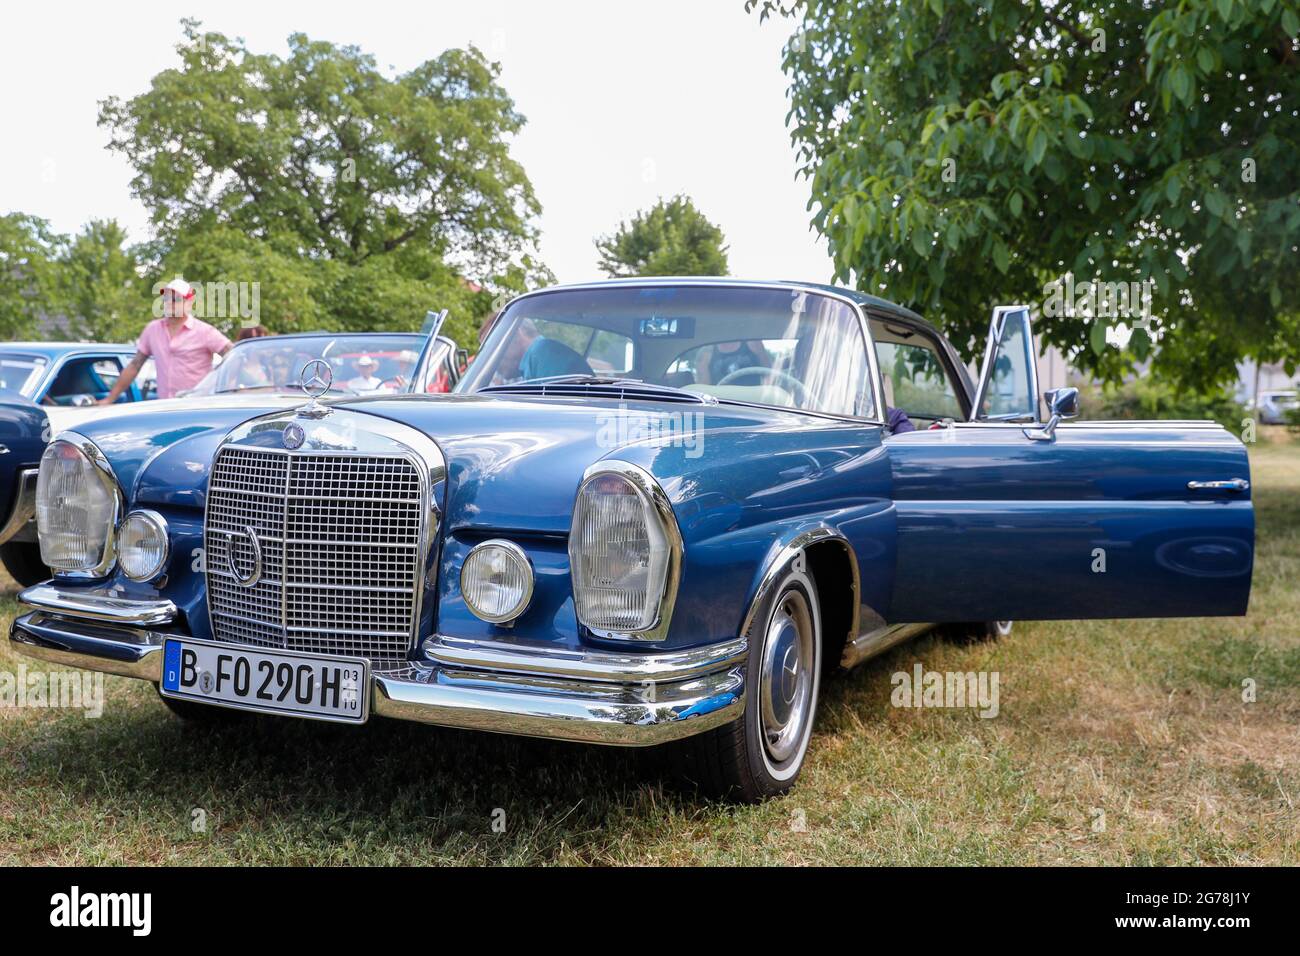 27 June 2021, Brandenburg, Königs Wusterhausen: A 1969 Mercedes-Benz W111/112 - 280 SE Coupe stands vintage car parade 'Rummblubbern' in and around Königs Wusterhausen. More than 400 American vehicles are expected for the approximately two-hour motorcade. The route of the motorcade will be around 40 kilometres long. Photo: Gerald Matzka/dpa-Zentralbild/ZB Stock Photo